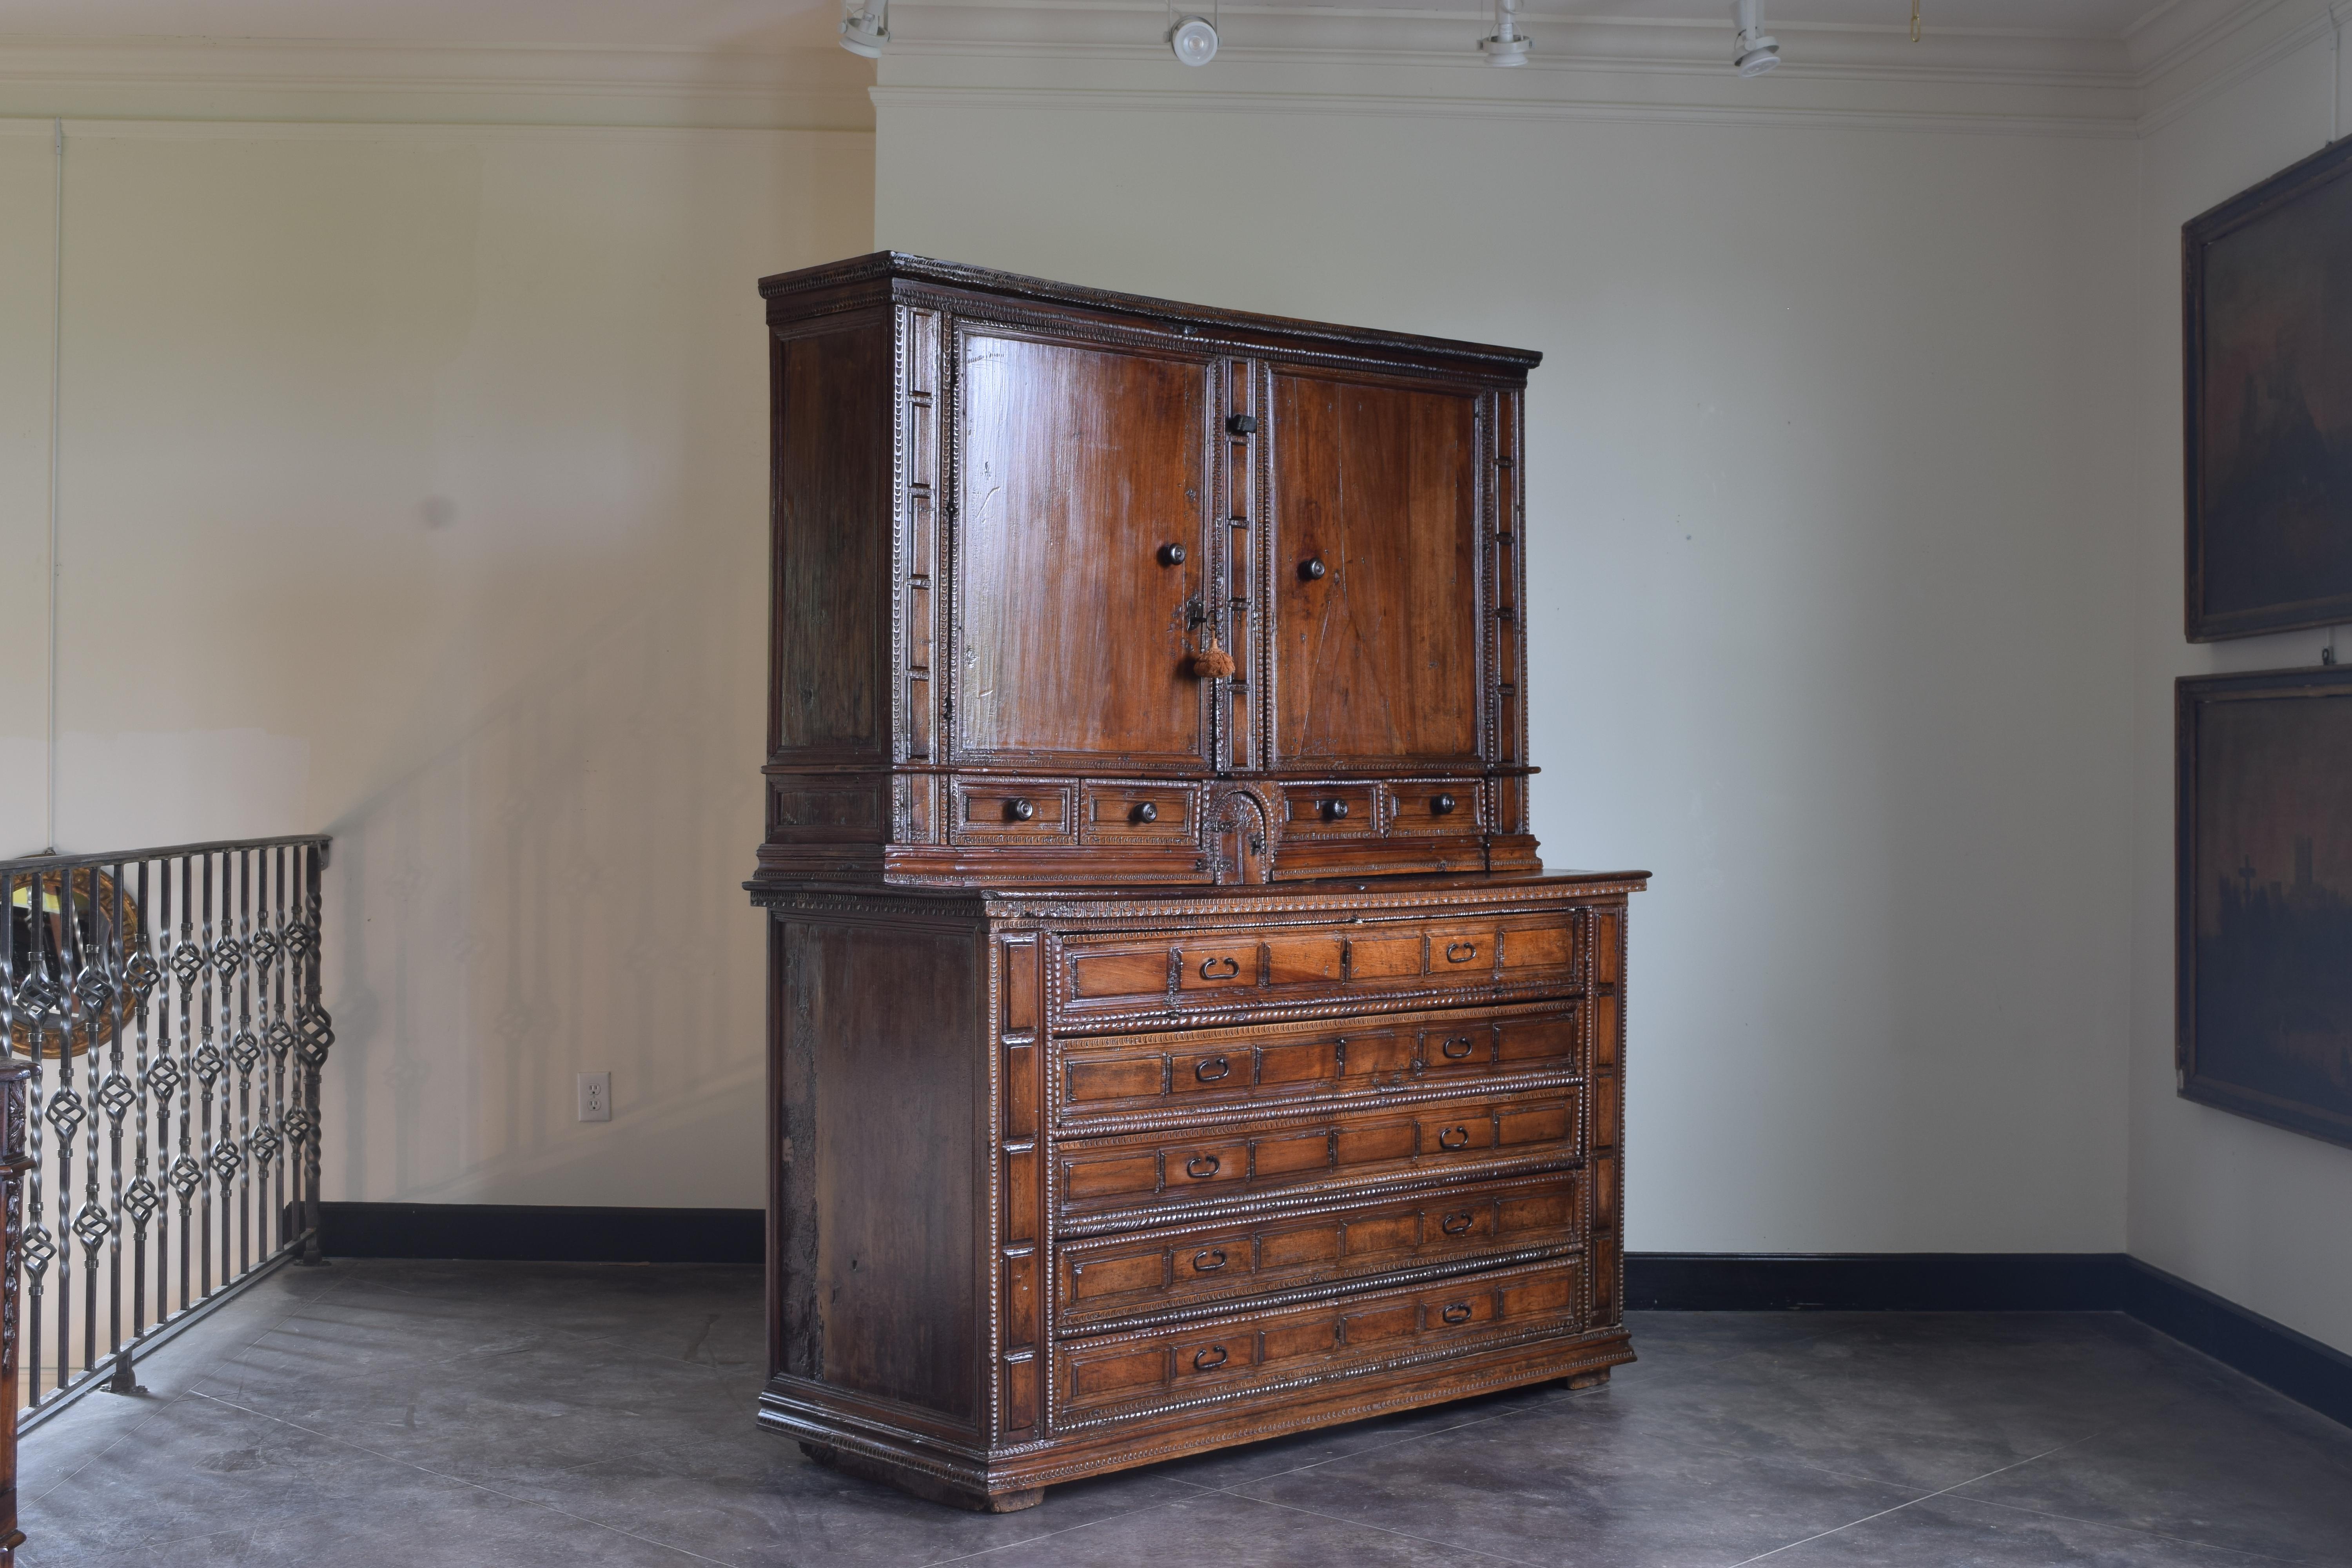 Hand-Carved Italian Baroque Period Carved Walnut Sacristy Cabinet, Mid to Late 17th Century